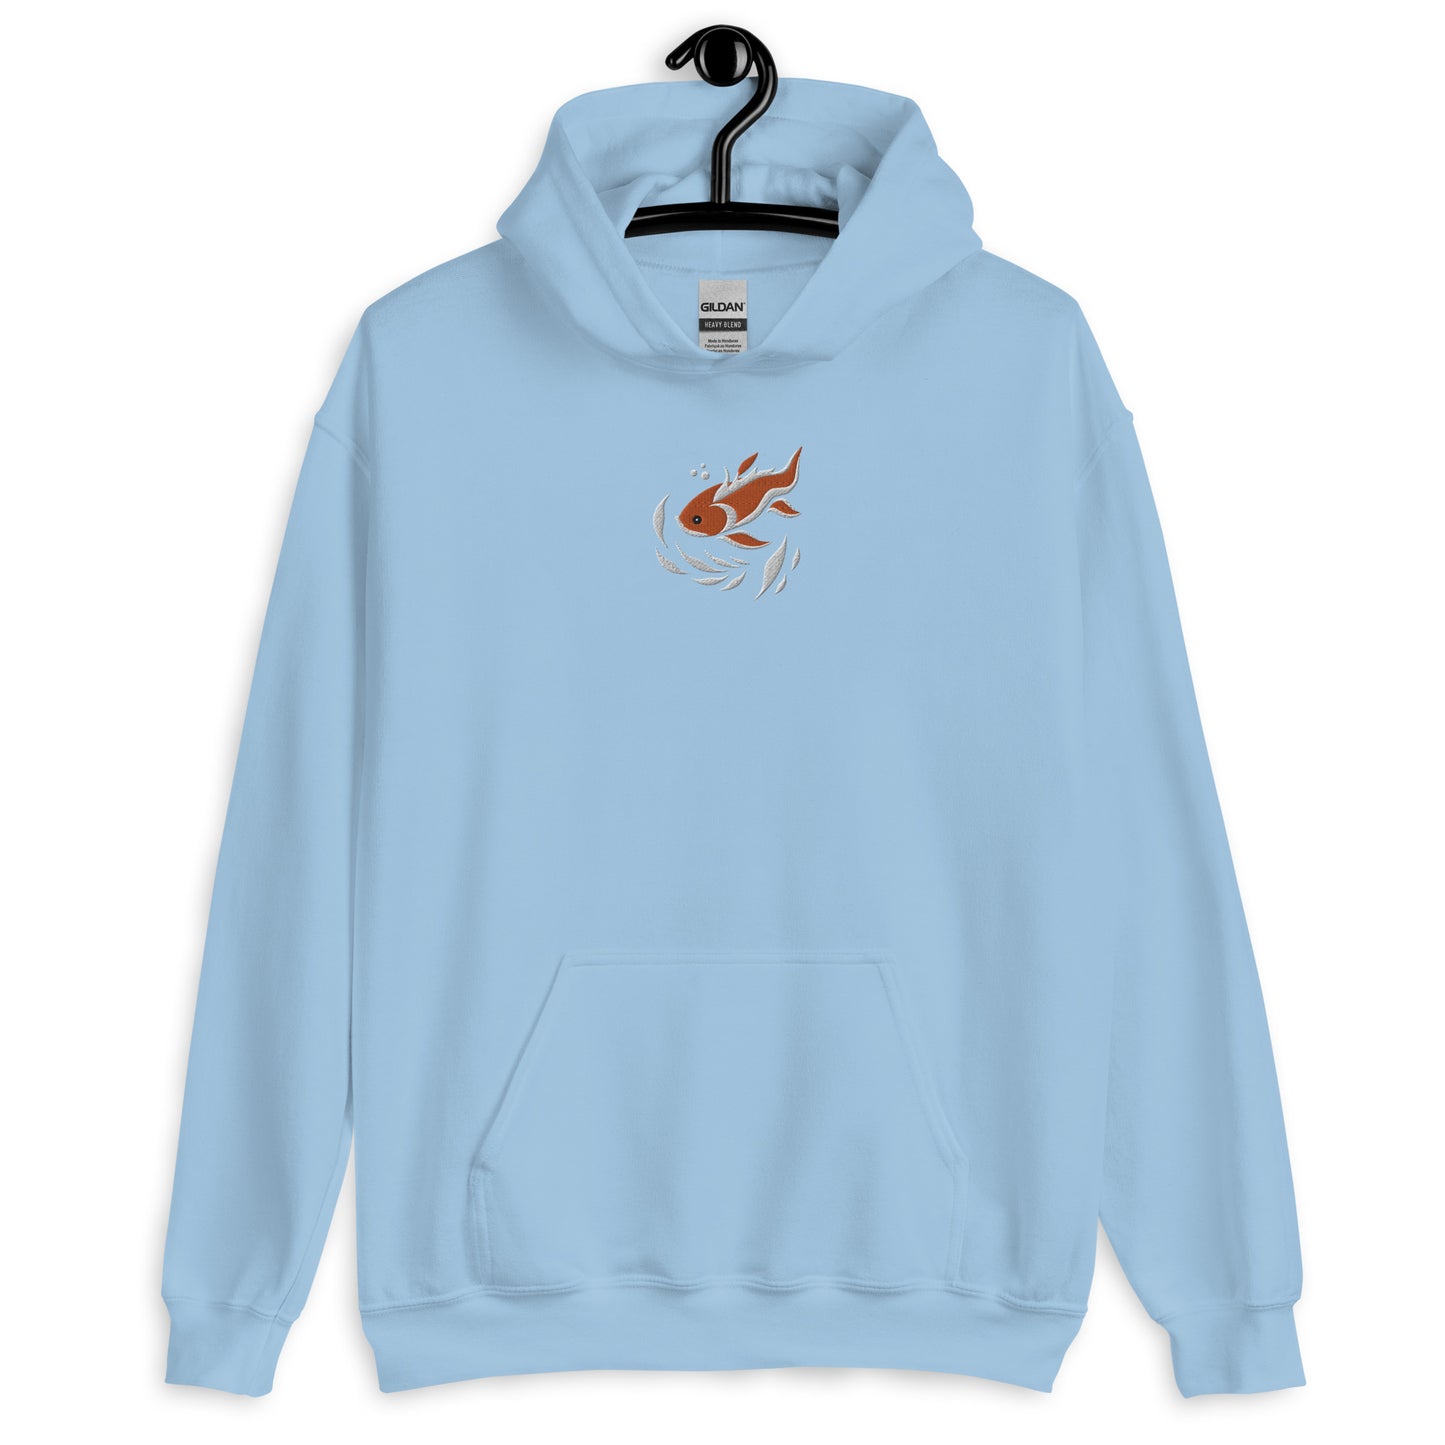 Koi Fish Embroidered Hoodie, Japanese Graphic Fishing Sweatshirt Fleece Embroidery Pullover Sweater Men Women Aesthetic Top